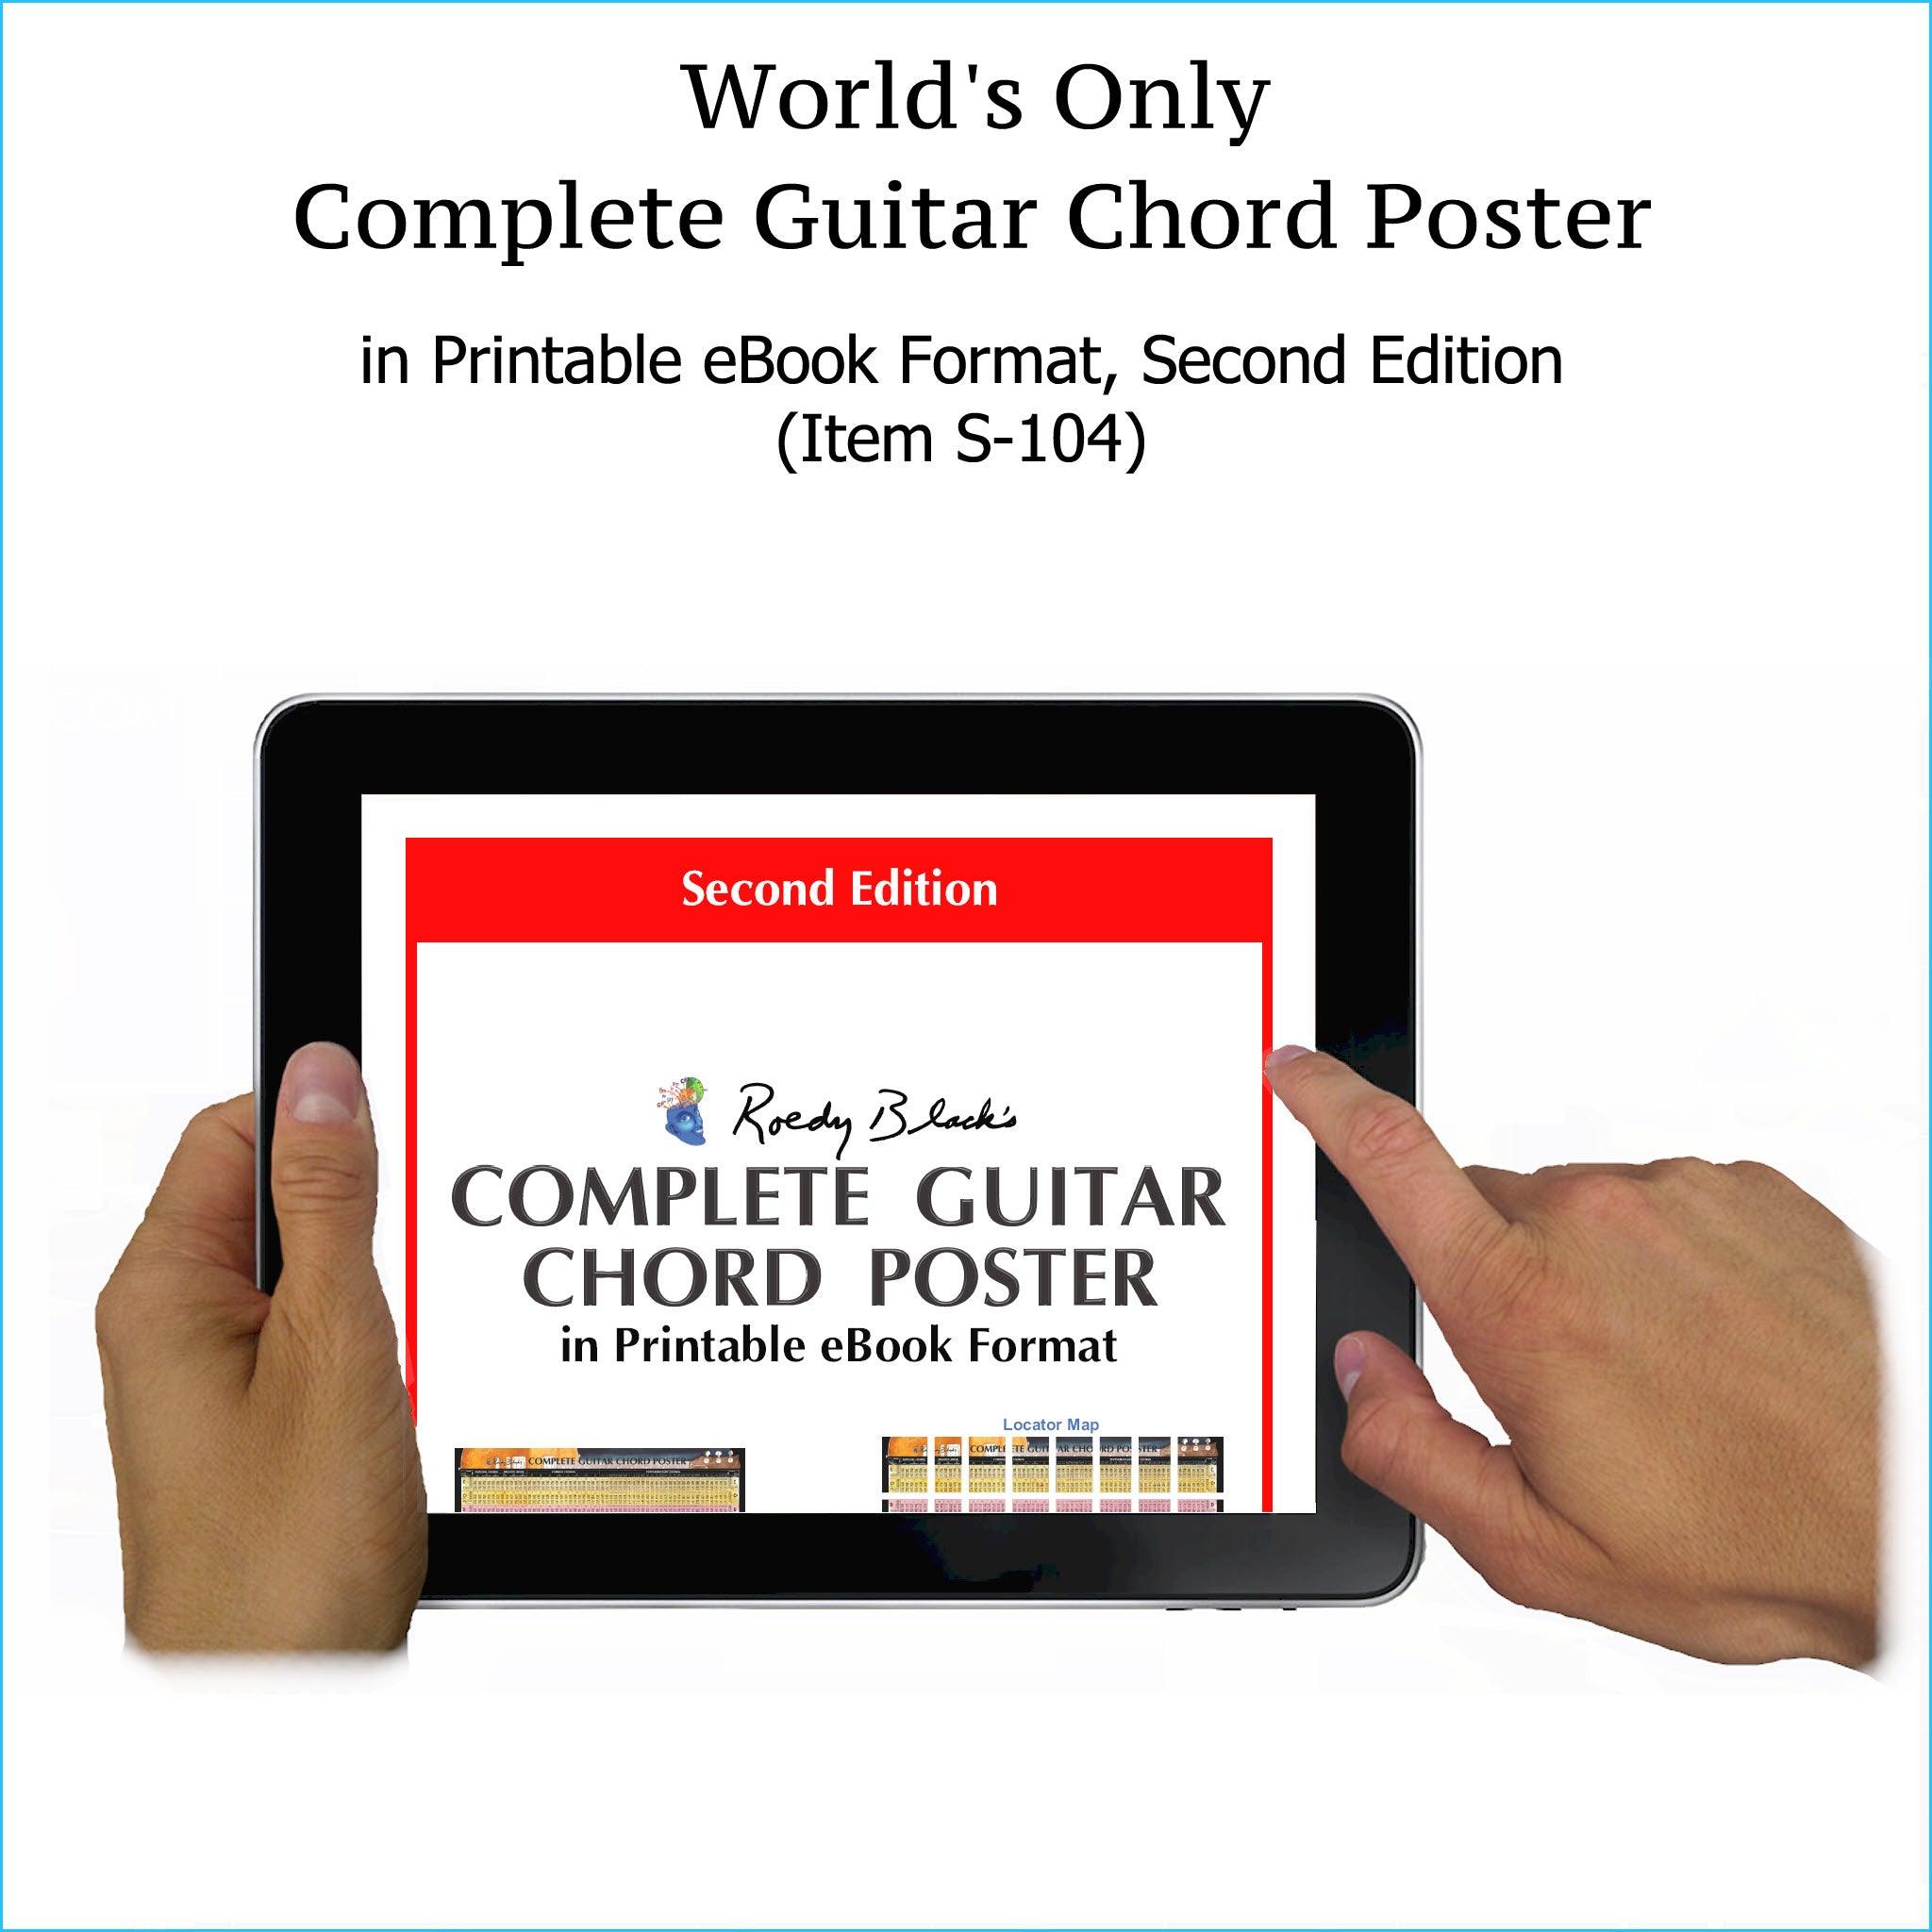 Complete guitar chords chart in printable ebook format, second edition.